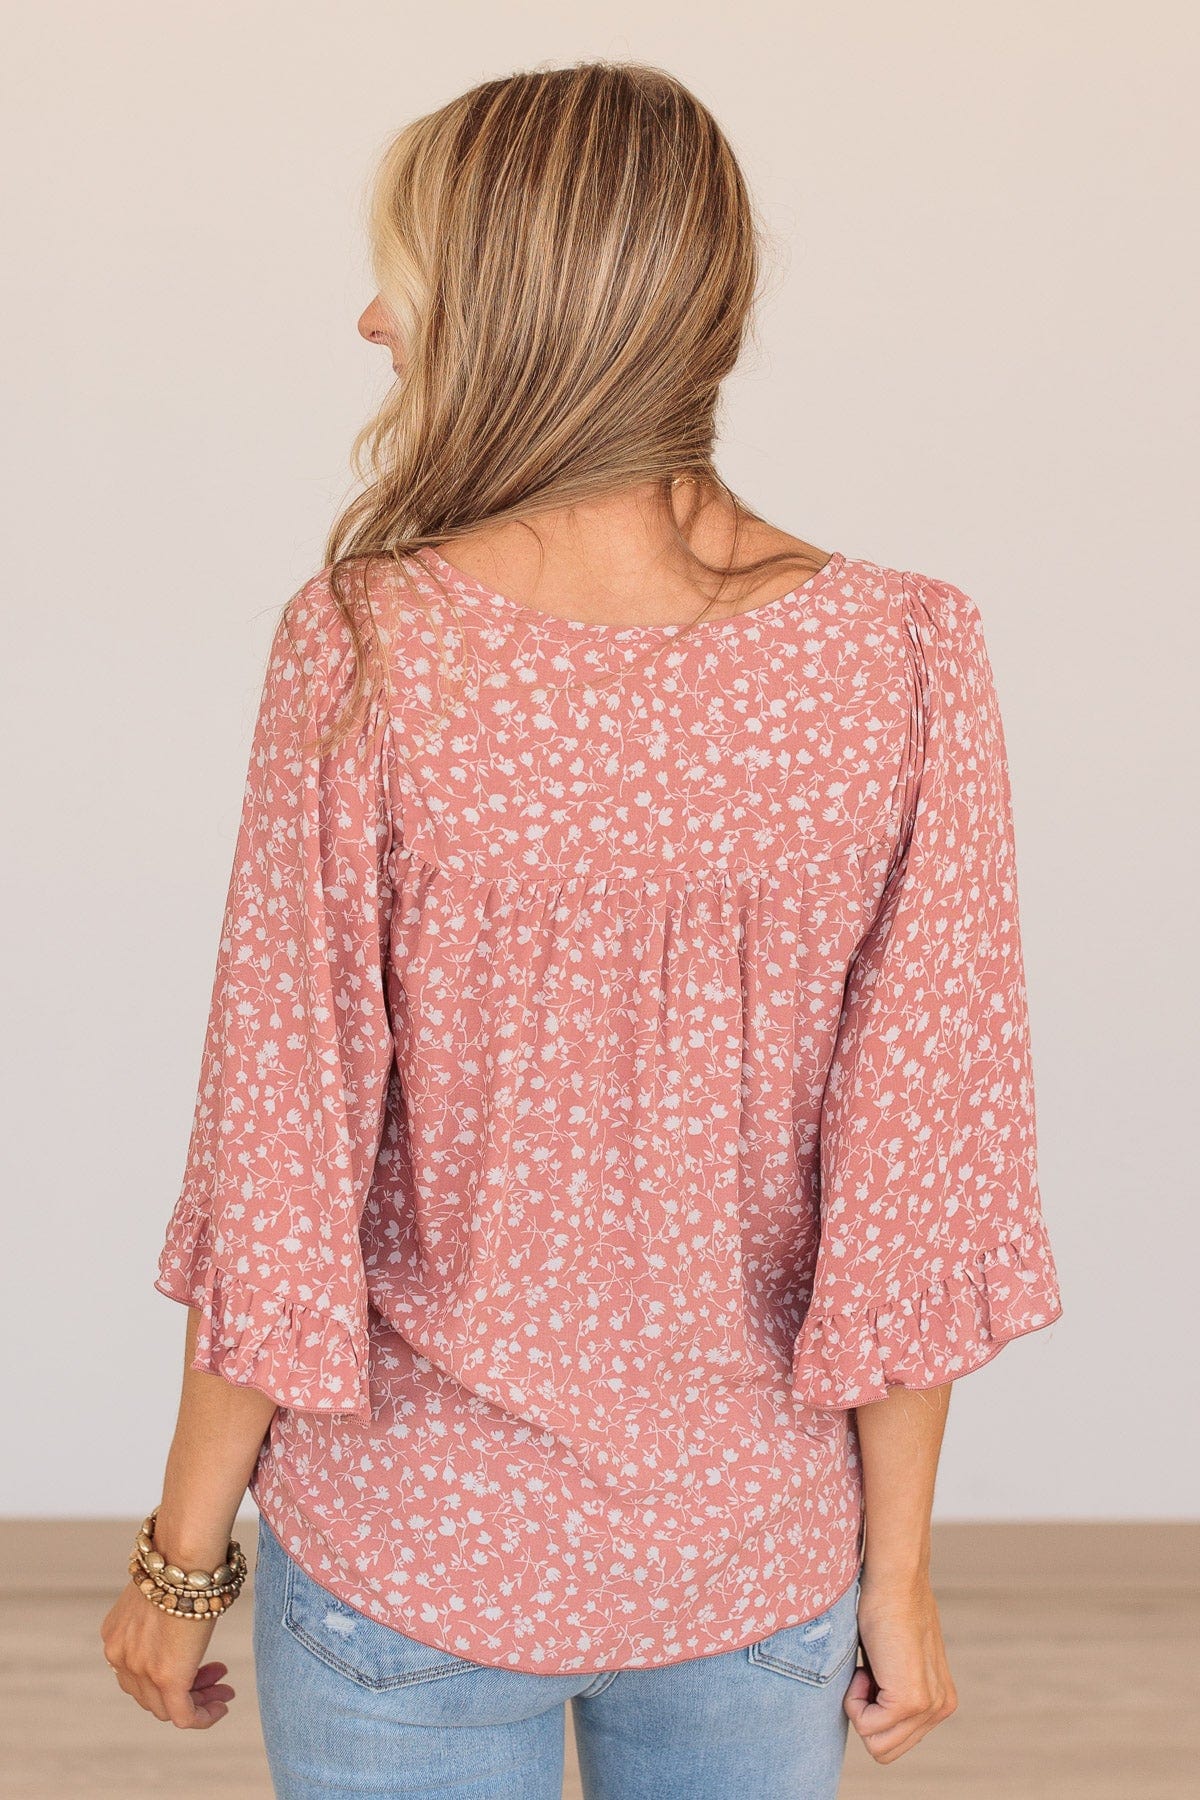 Magical Meadows Floral Blouse- Dusty Rose